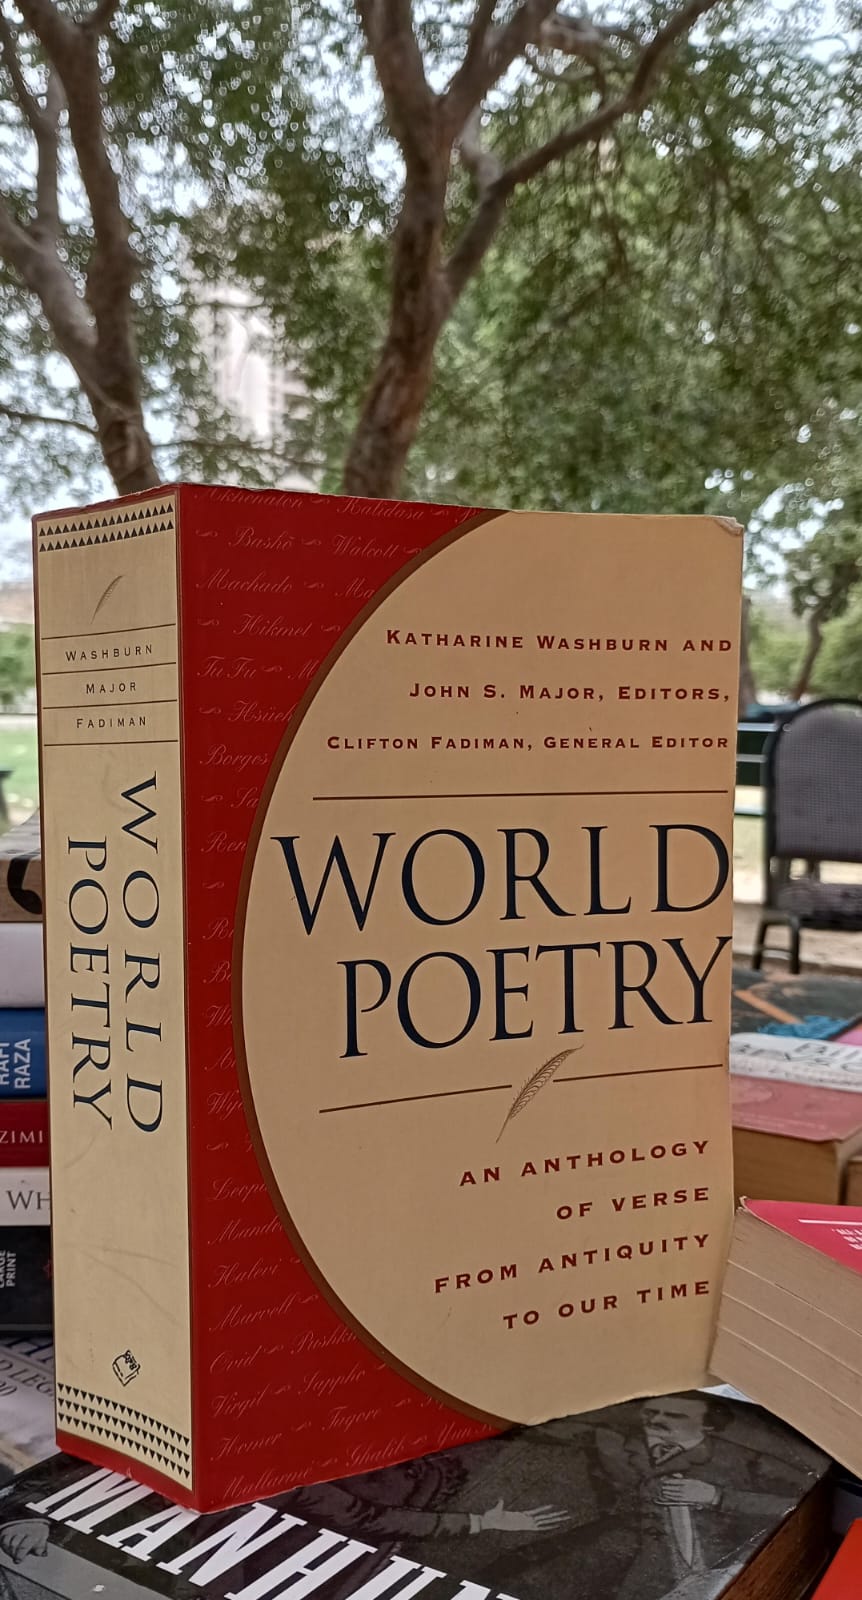 world poetry an anthology of verse from antiquity to our time edited by washburn, major and fadiman.